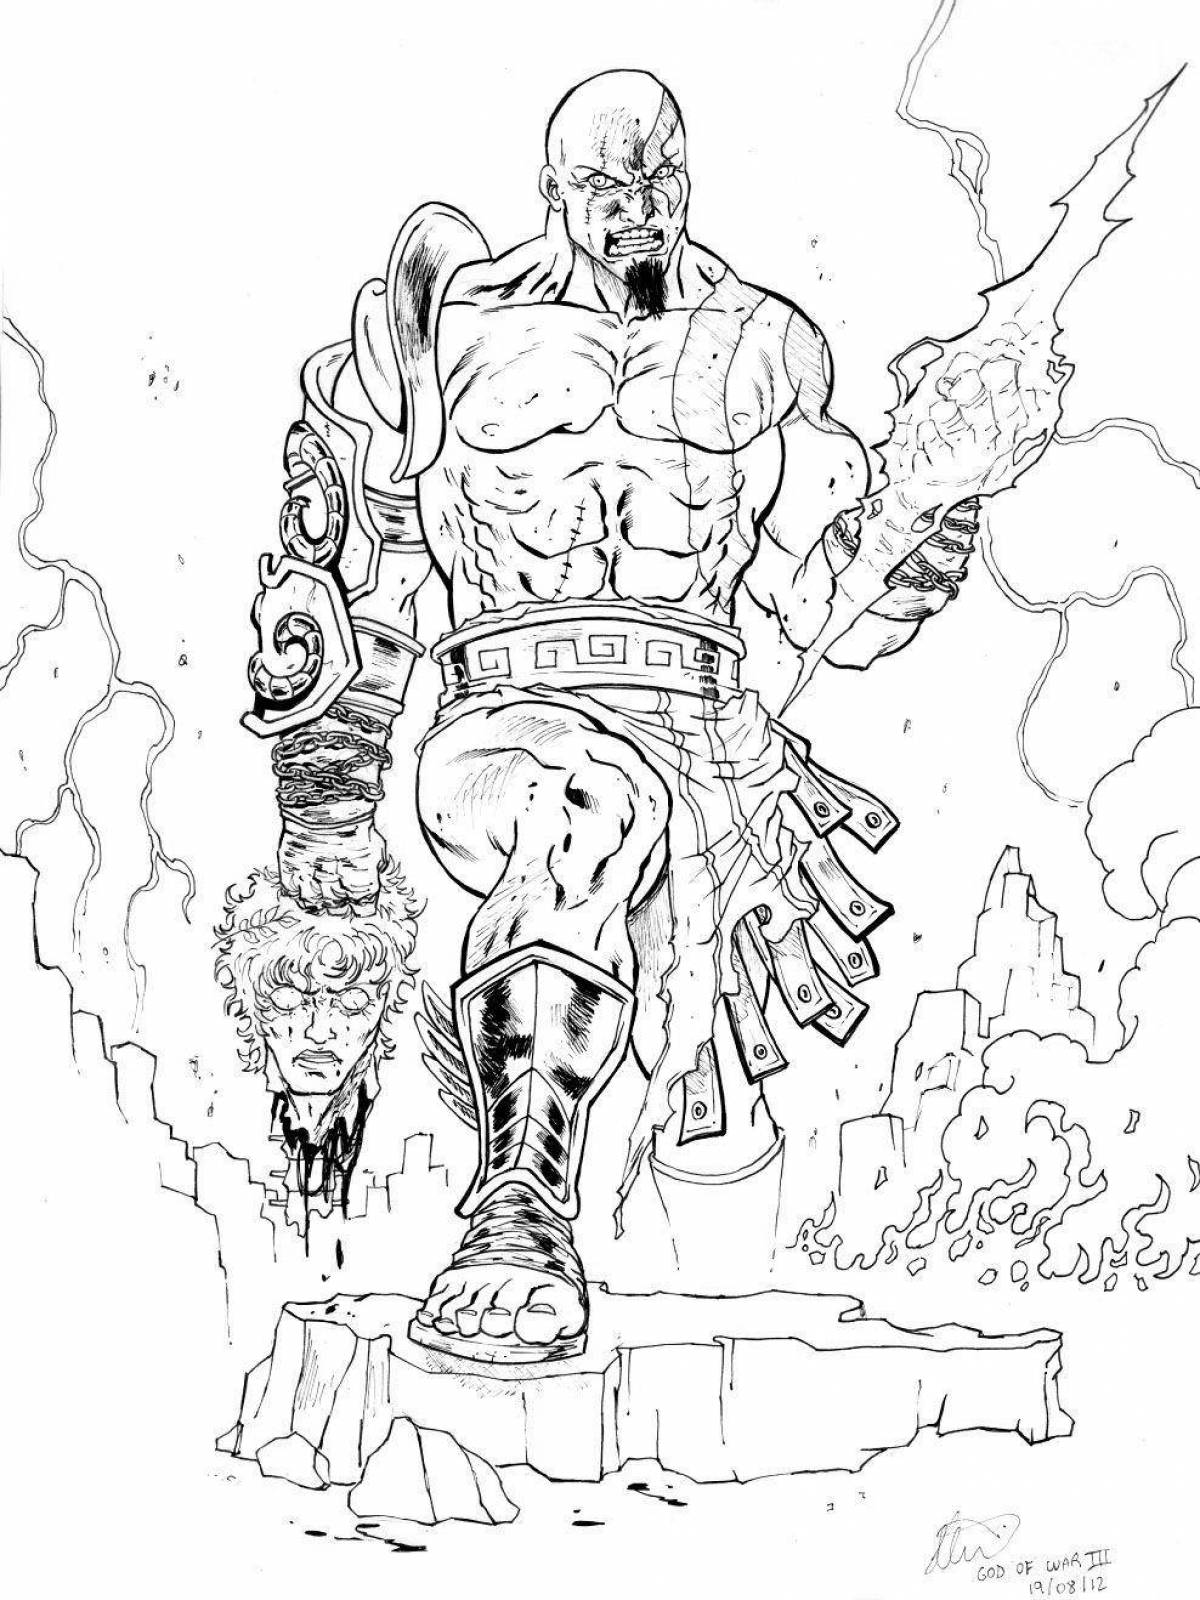 Awesome kratos coloring page